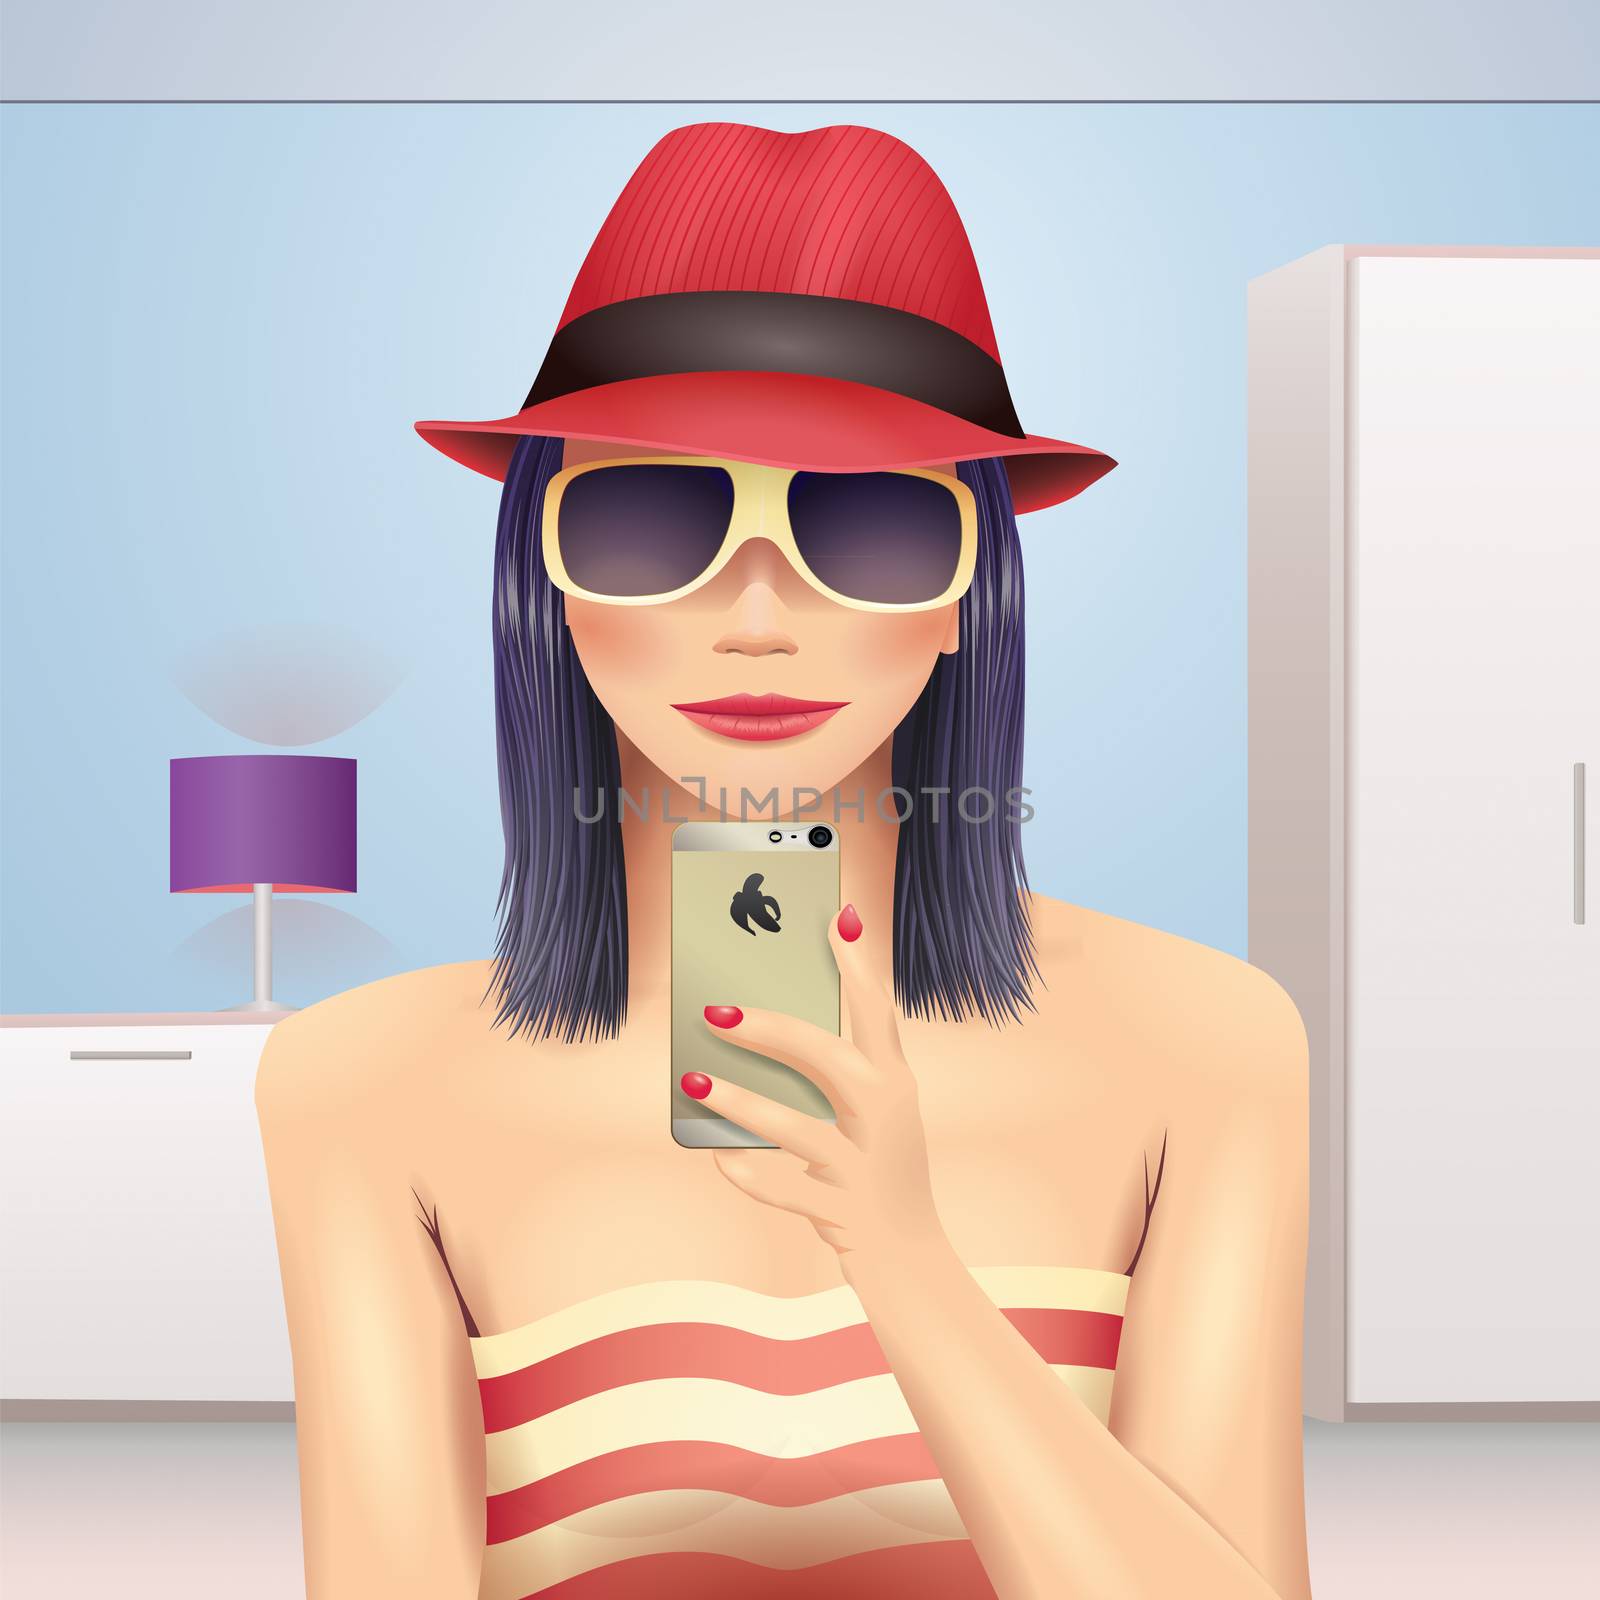 Girl taking self portrait in hat and sunglasses.